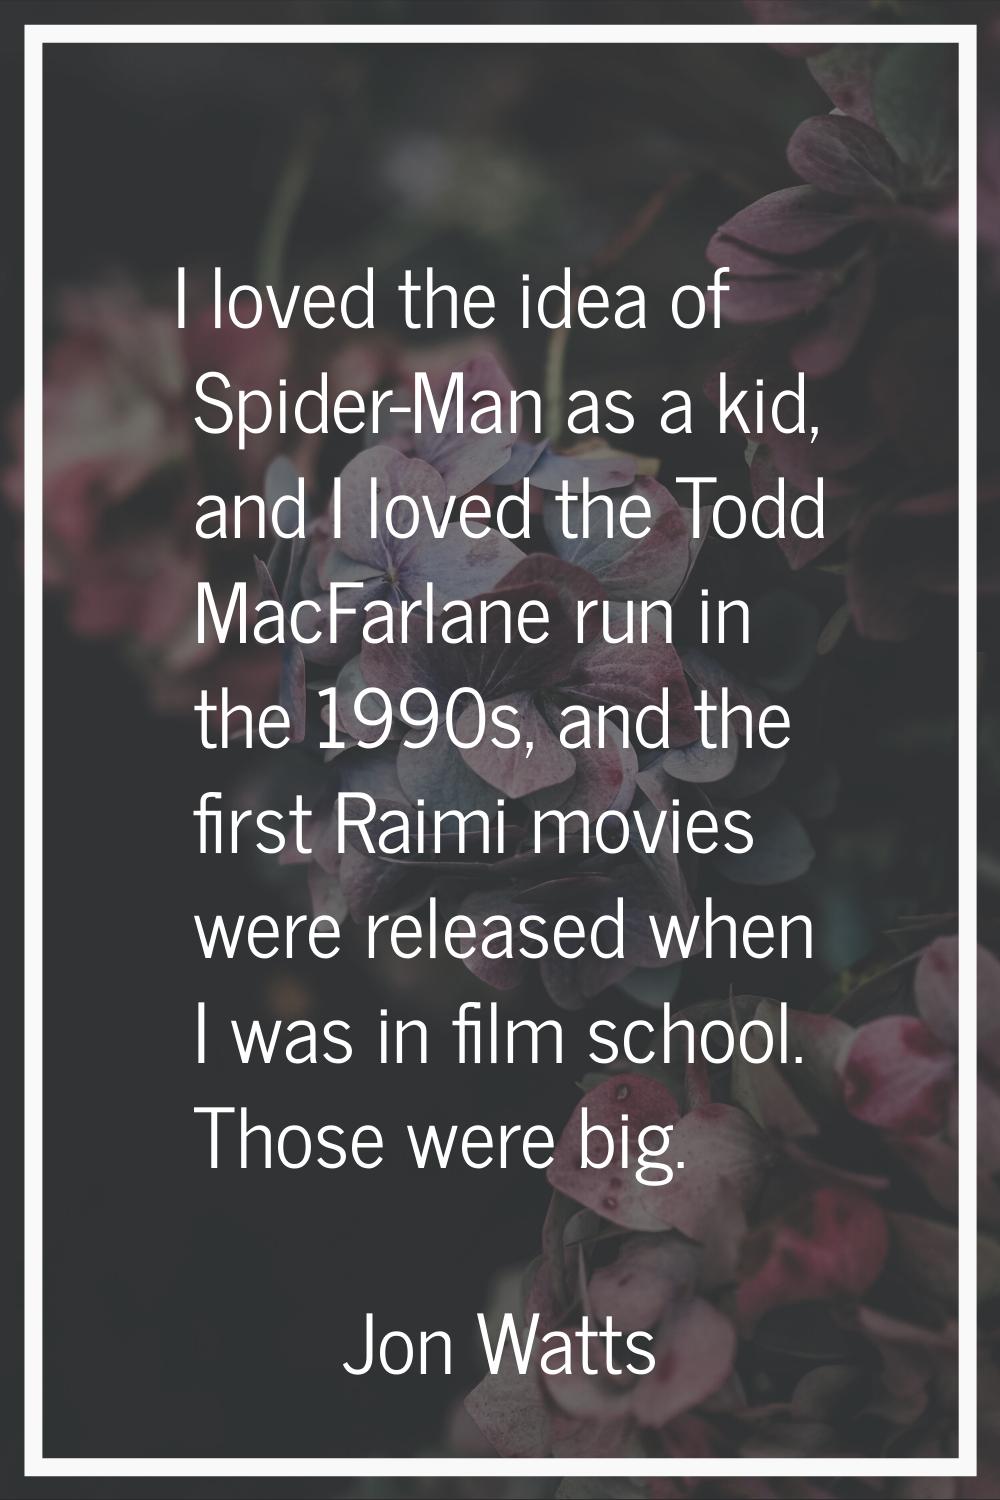 I loved the idea of Spider-Man as a kid, and I loved the Todd MacFarlane run in the 1990s, and the 